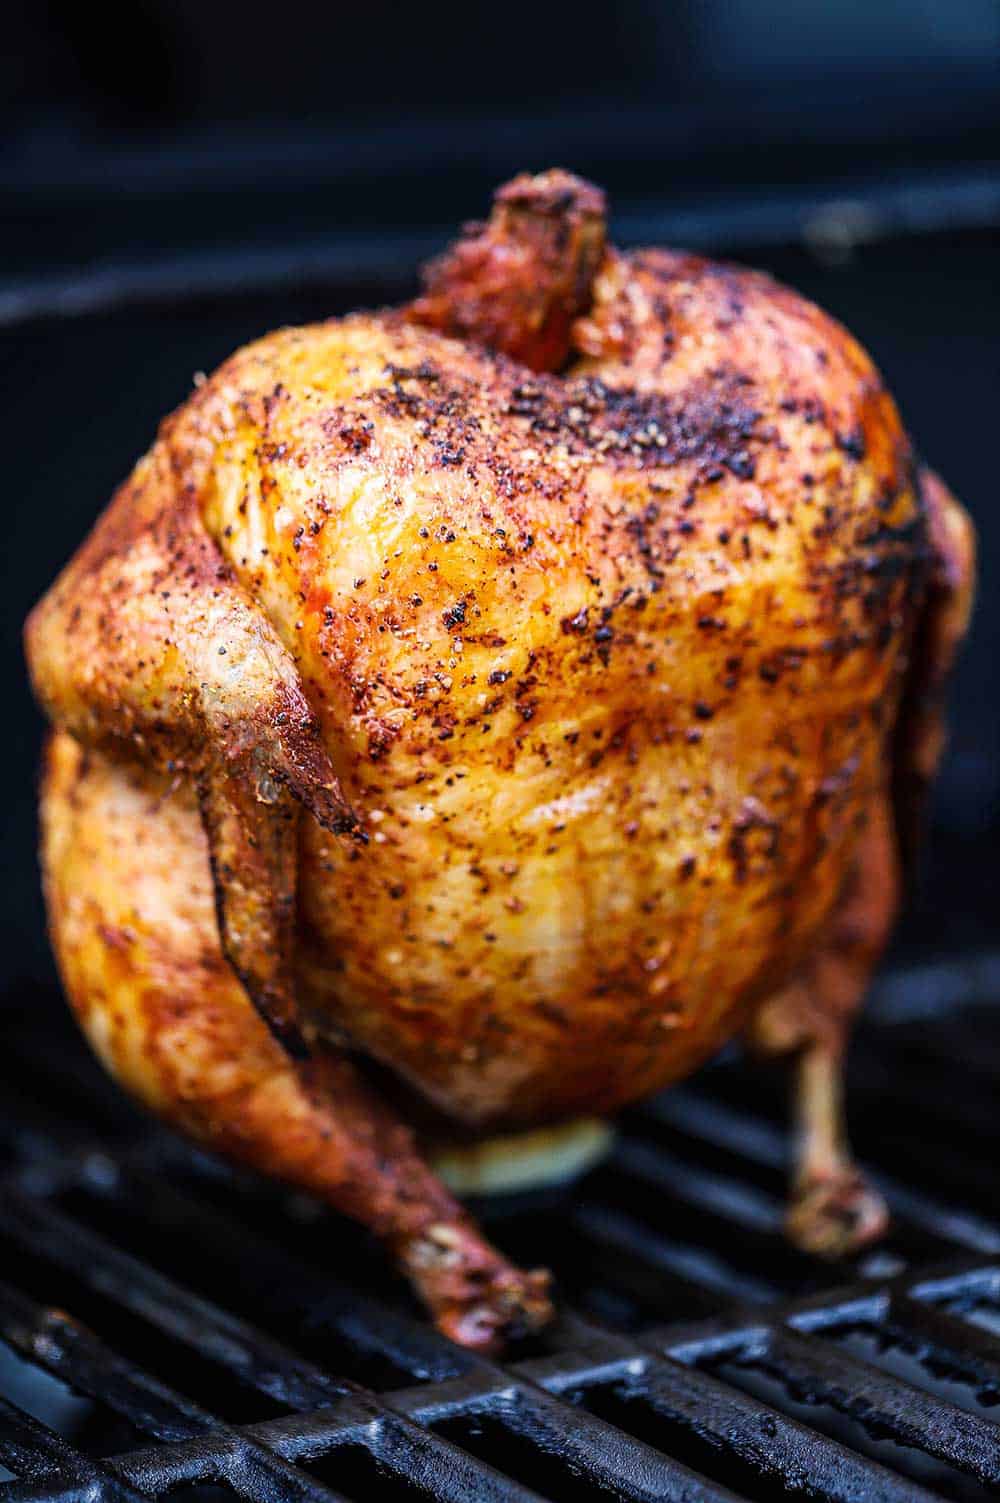 A fully cooked whole chicken that is sitting on a beer can on the grate of a gas grill.